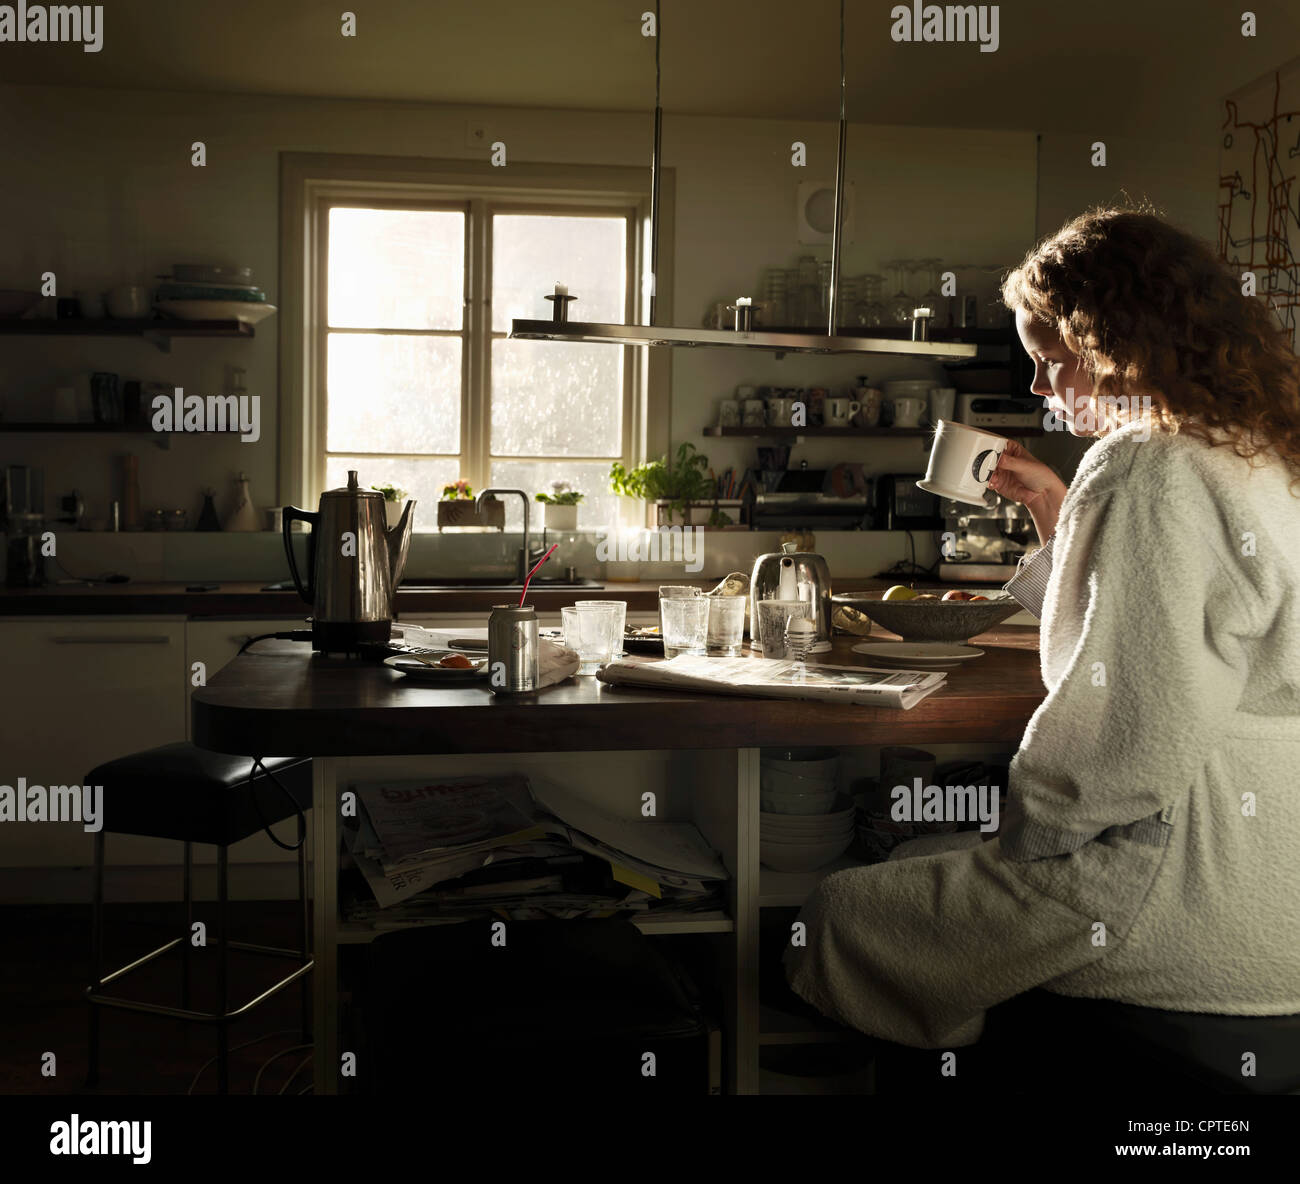 Young woman reading newspaper at kitchen table over breakfast Stock Photo